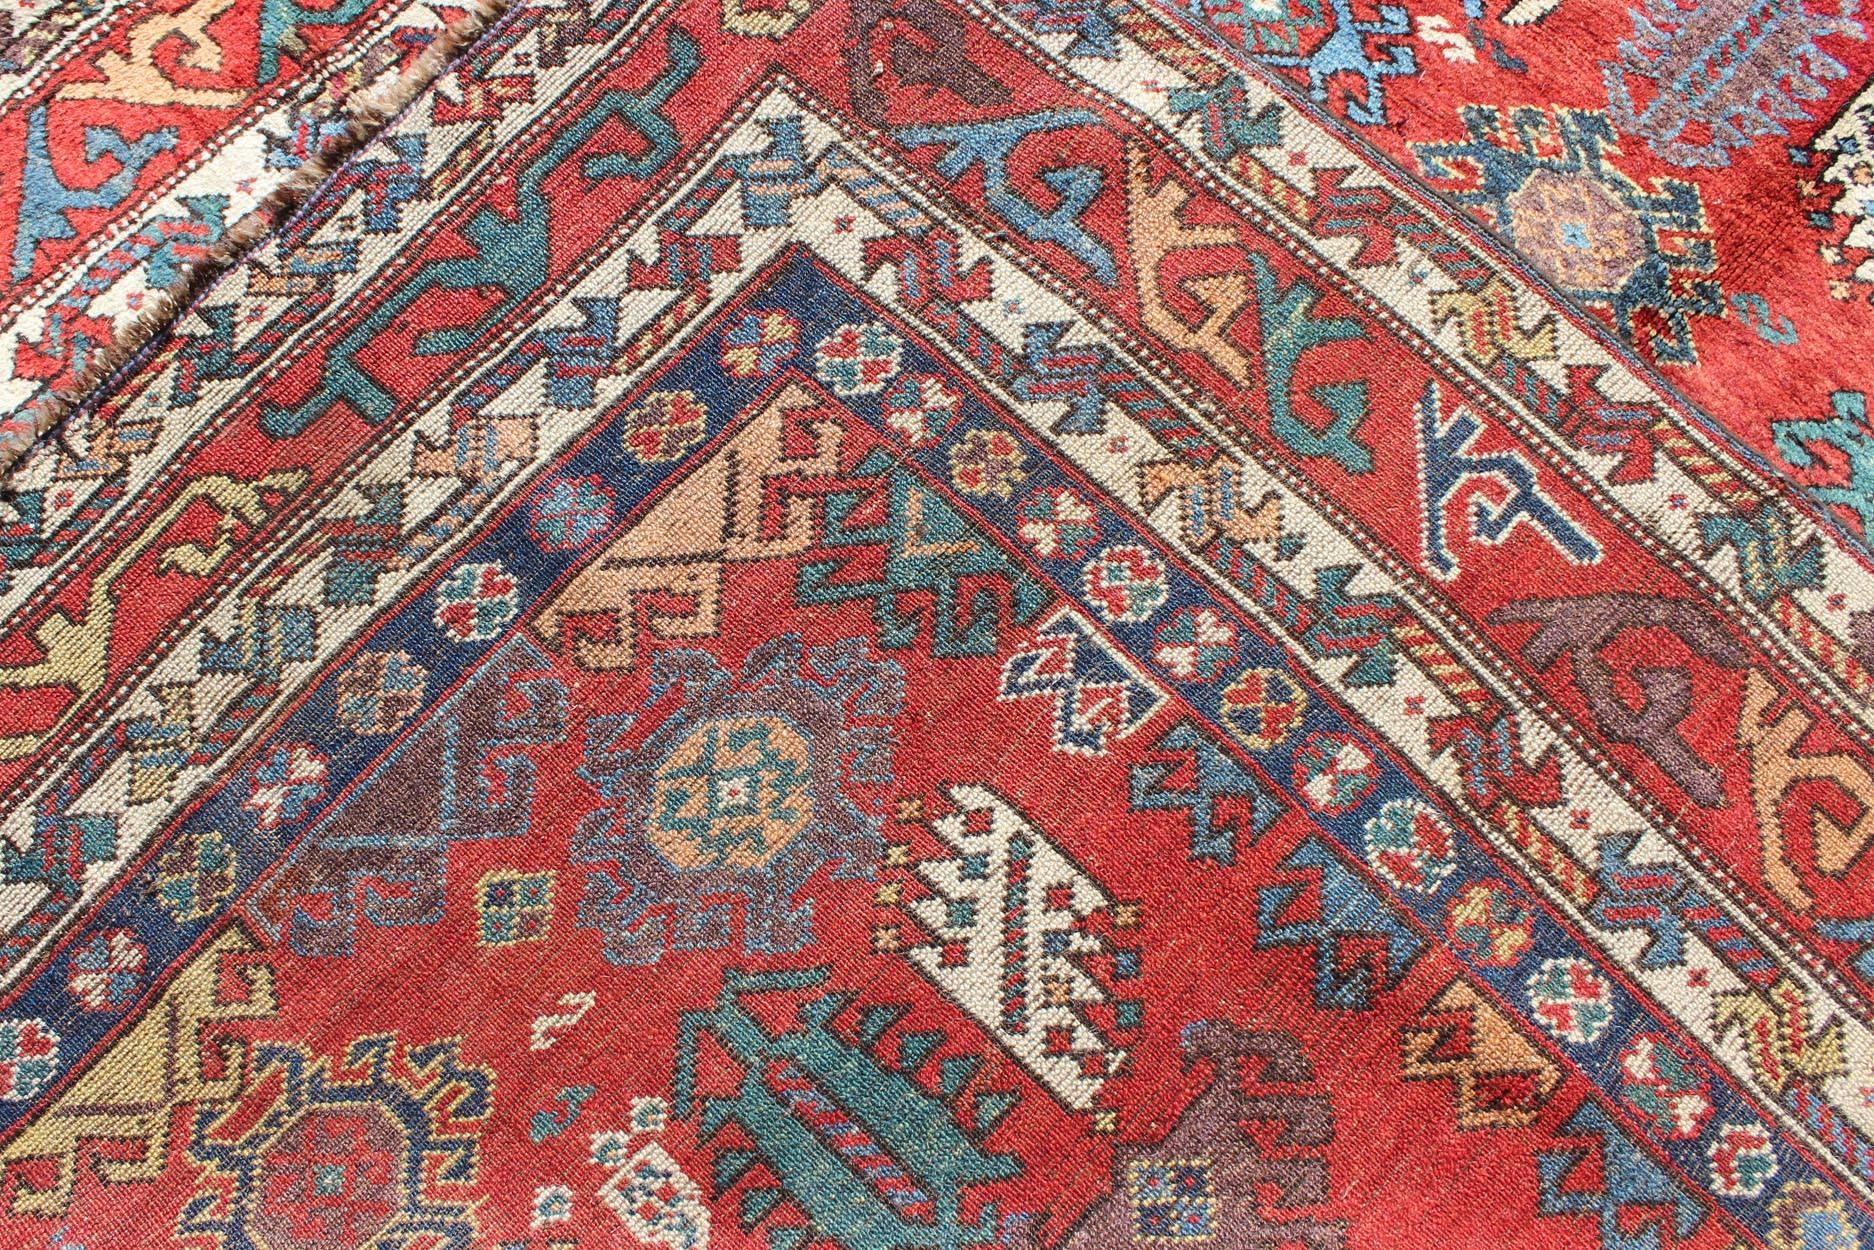 Early 20th Century Antique Qashqai Persian Rug with All-Over Sub-Geometric Design and Tiered Border For Sale